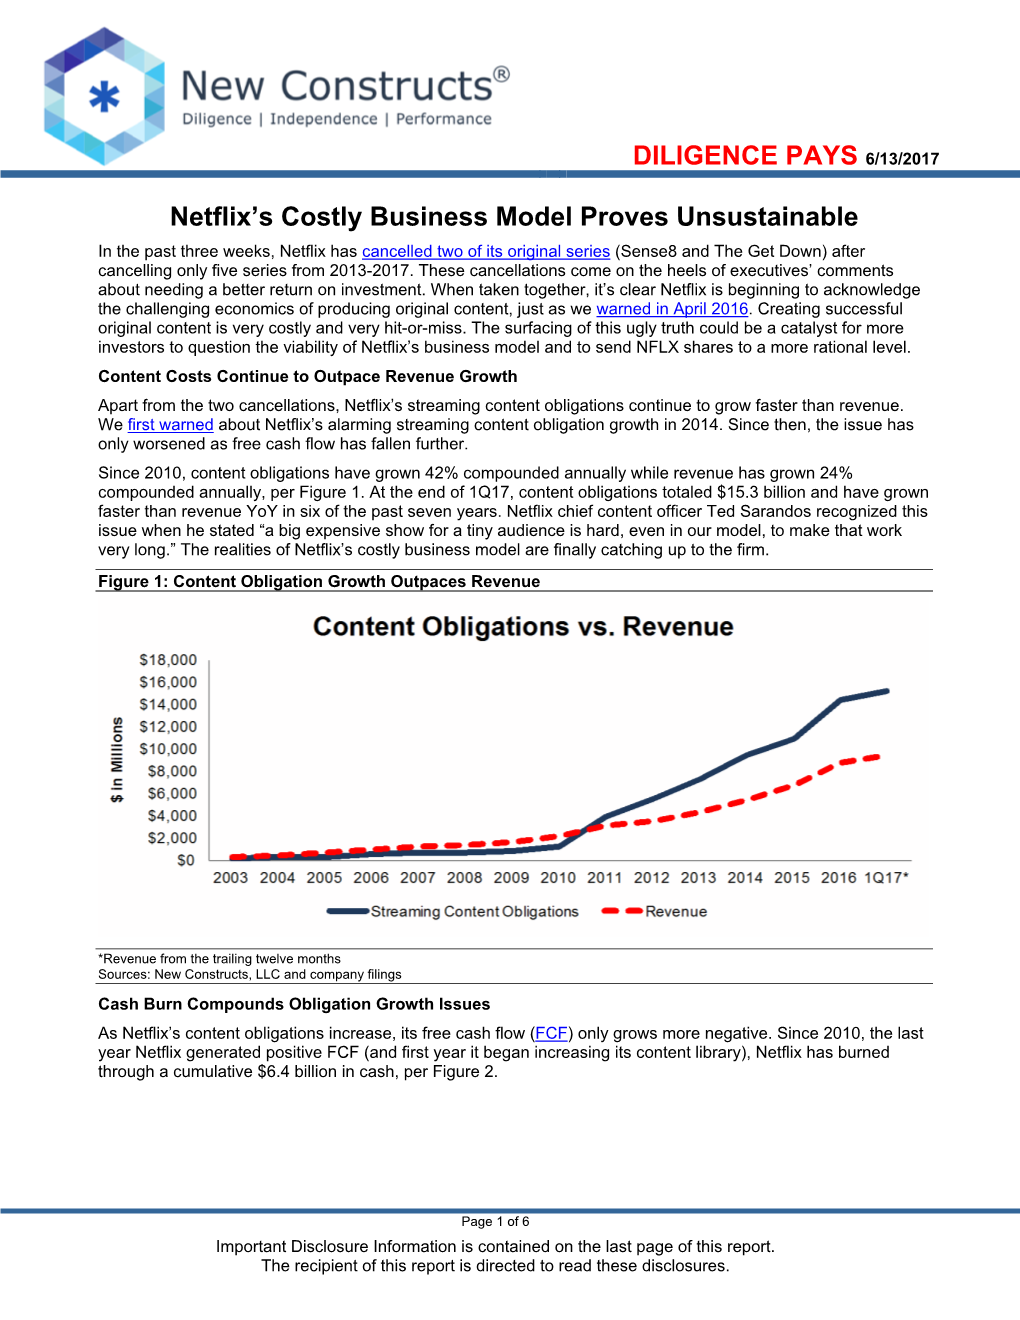 Netflix's Costly Business Model Proves Unsustainable